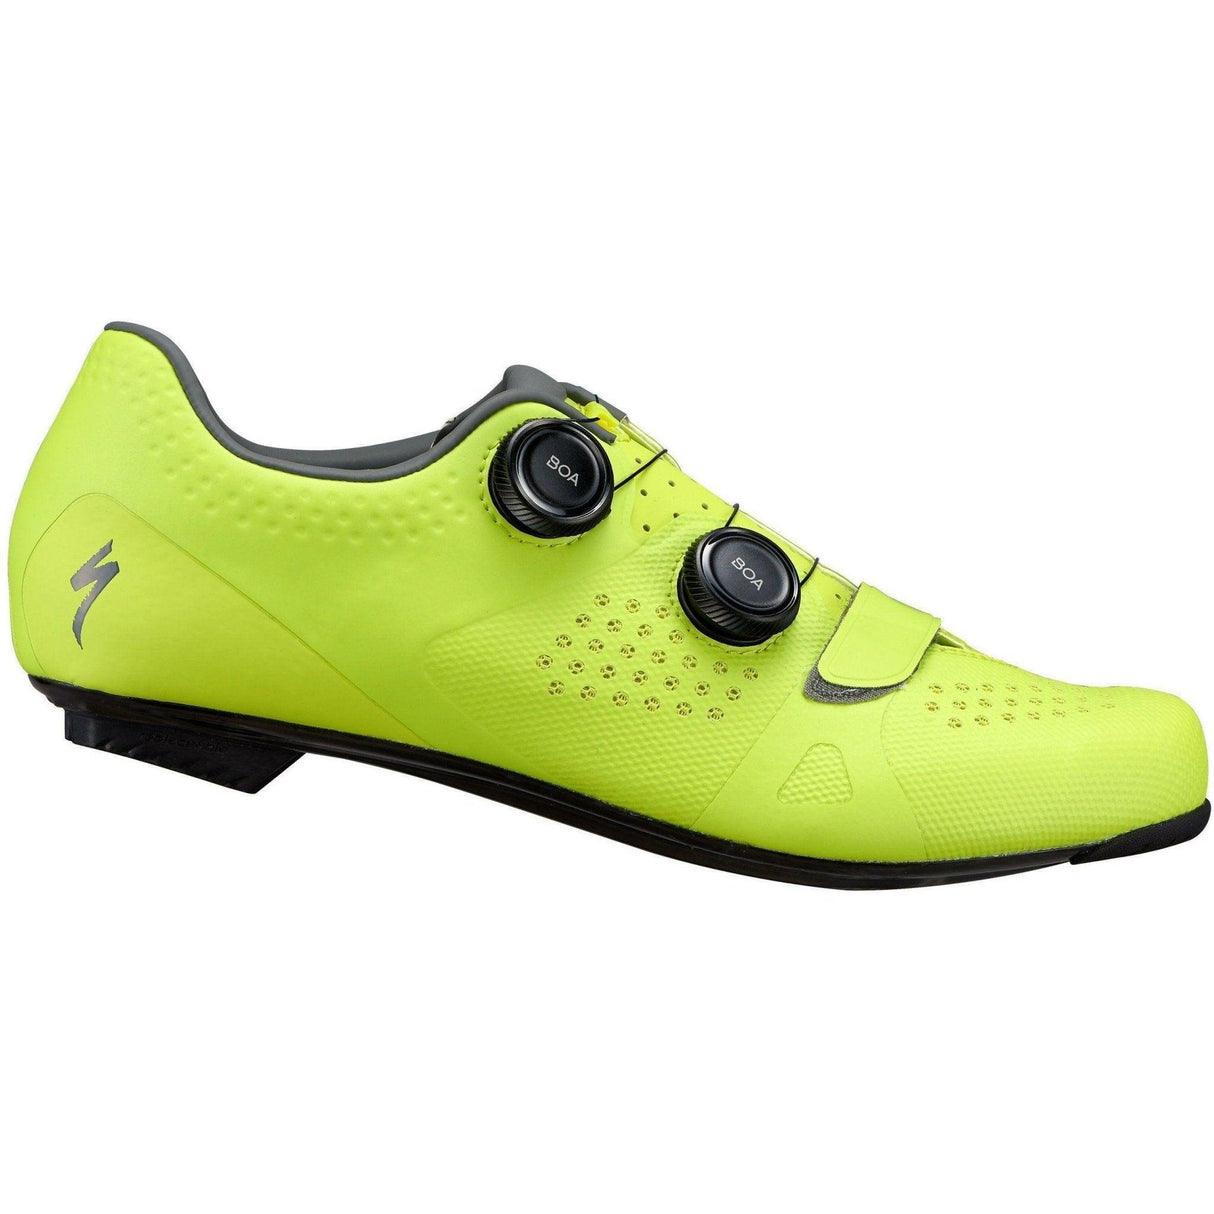 Specialized Torch 3.0 Road Shoe - Hyper | Strictly Bicycles